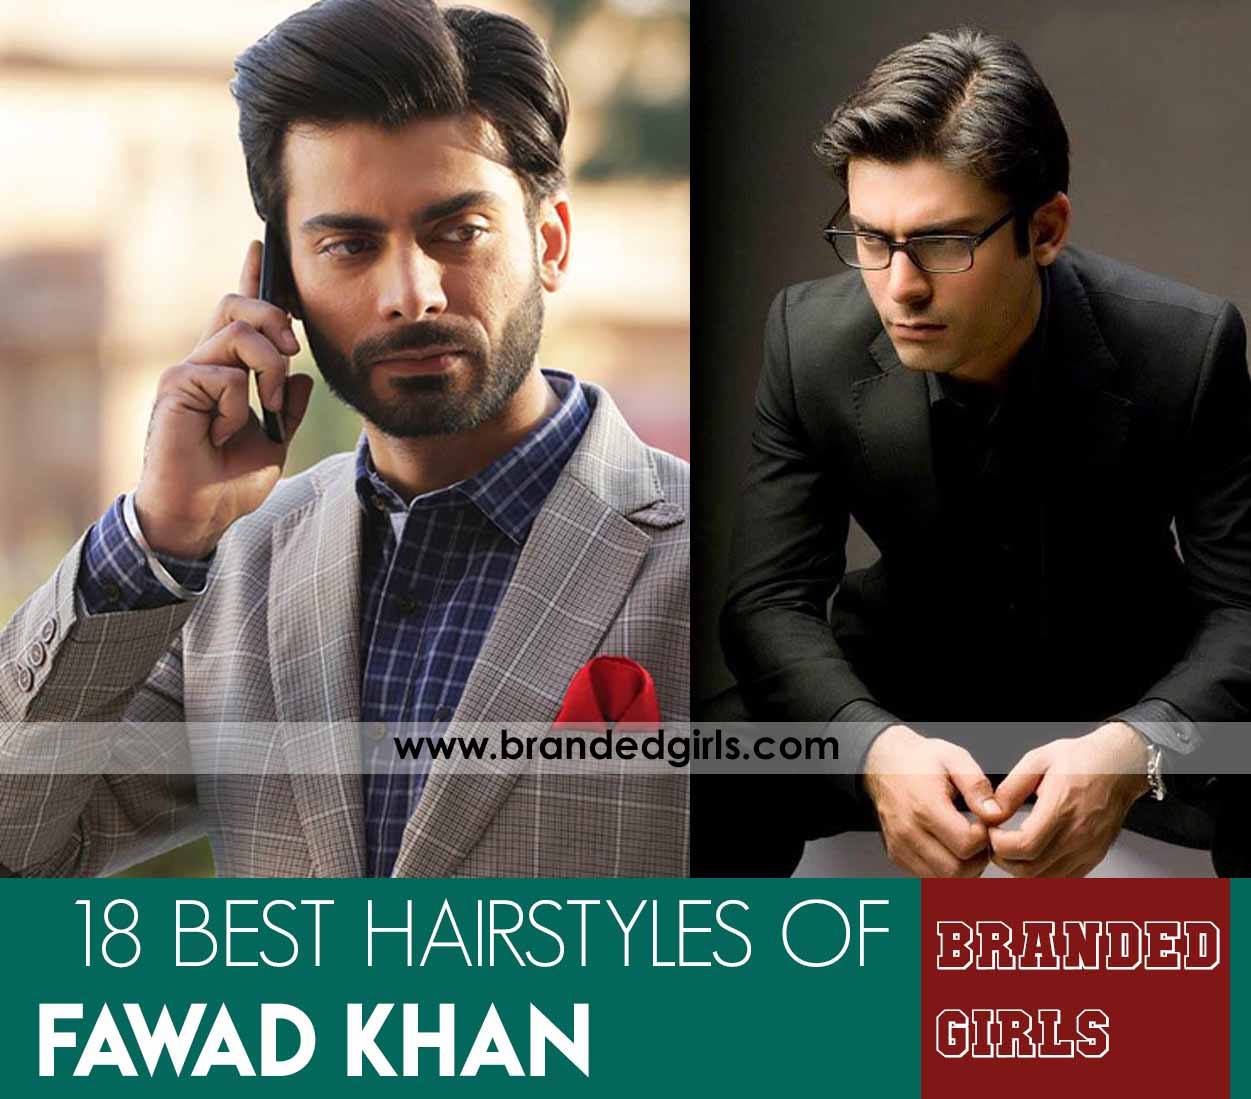 Fawad Khan Hairstyles-18 Top Haircuts of Fawad Khan of all time